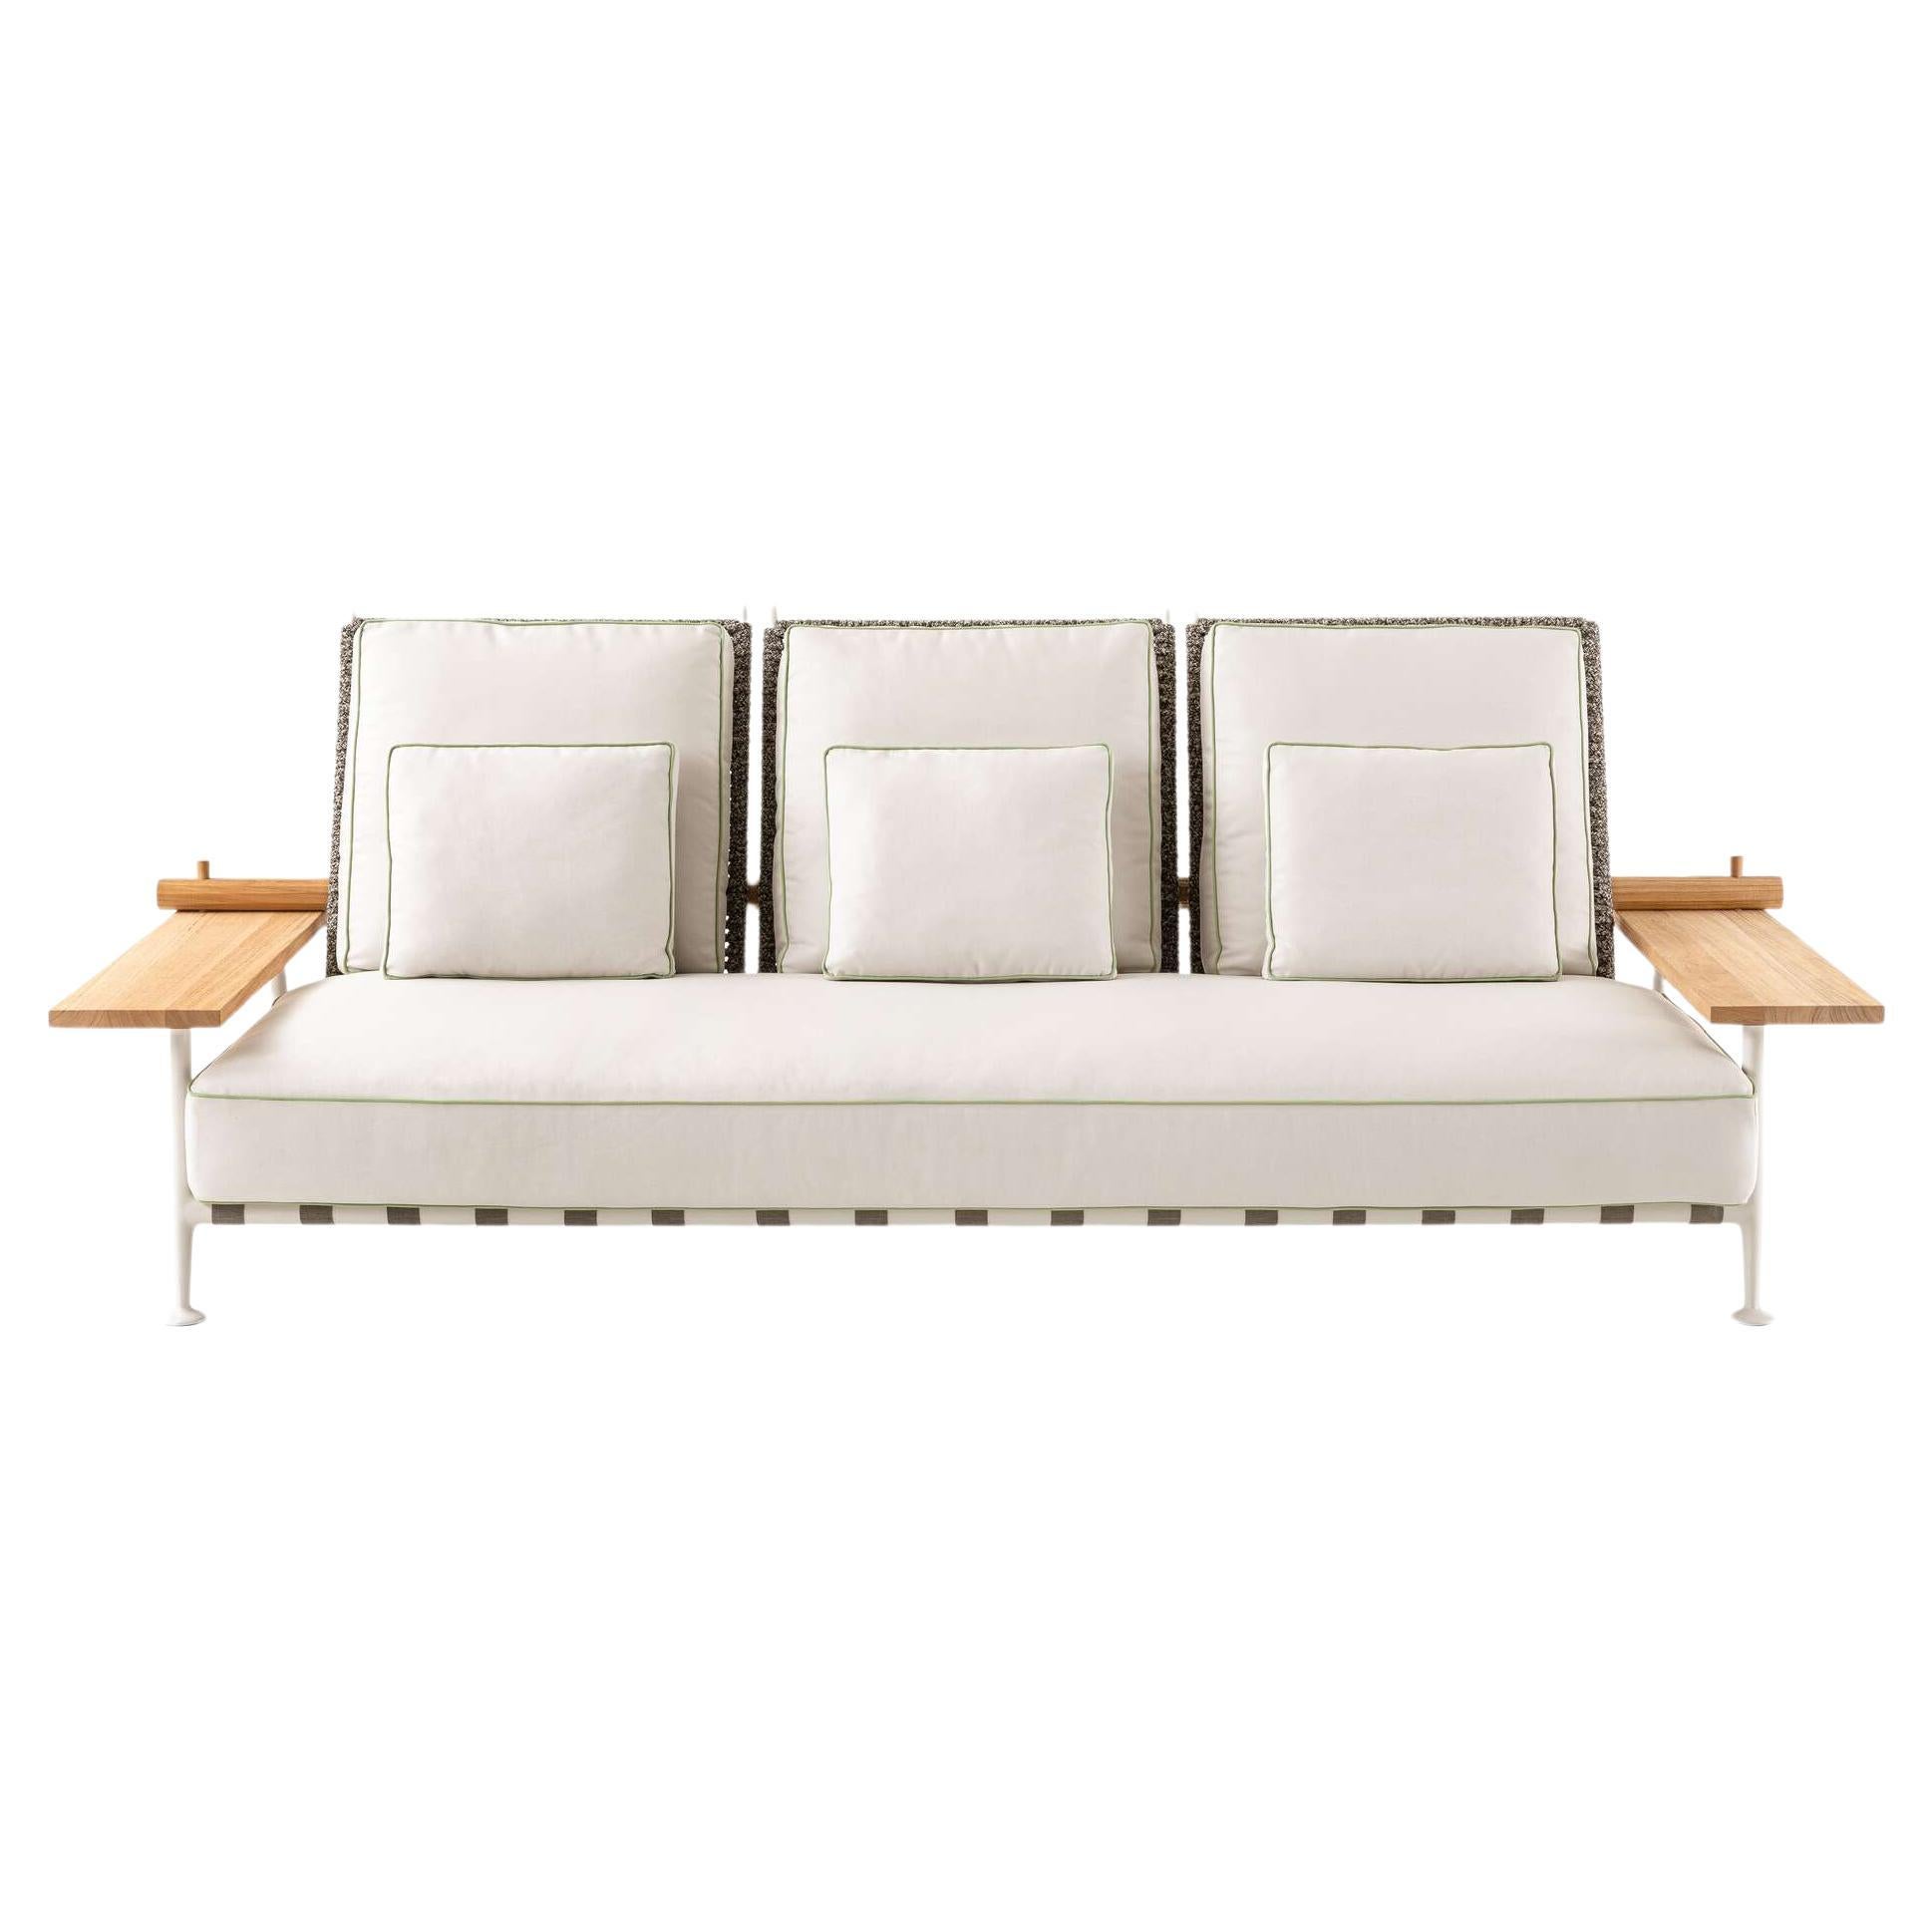 Philippe Starck 'Fenc-e-Nature' Outdoor Sofa for Cassina, Italy, new For Sale